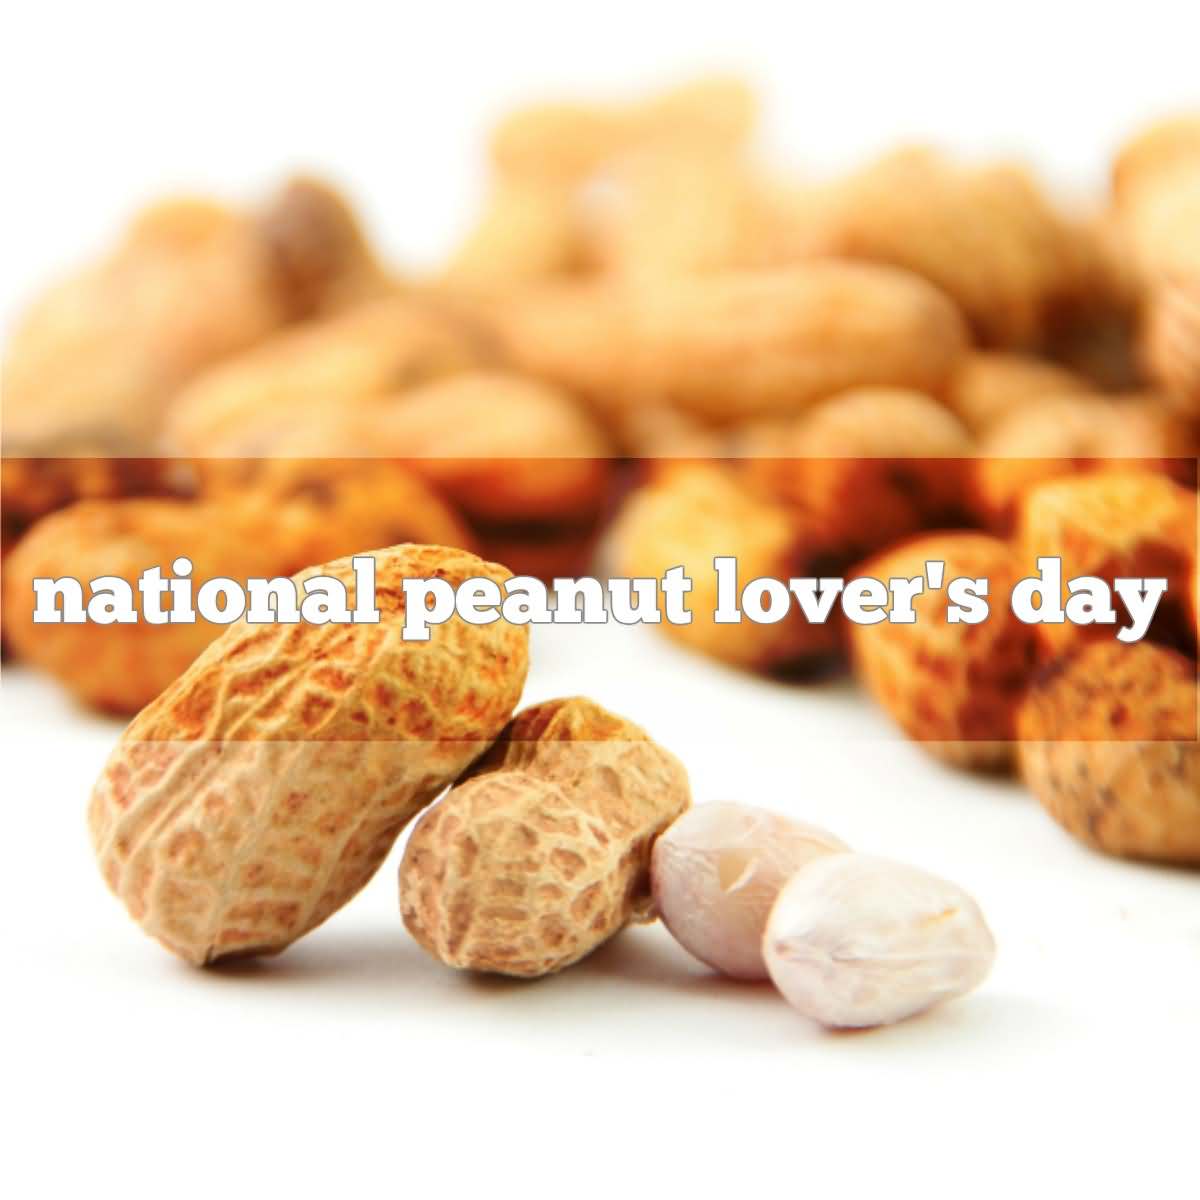 National Peanut Lover’s Day